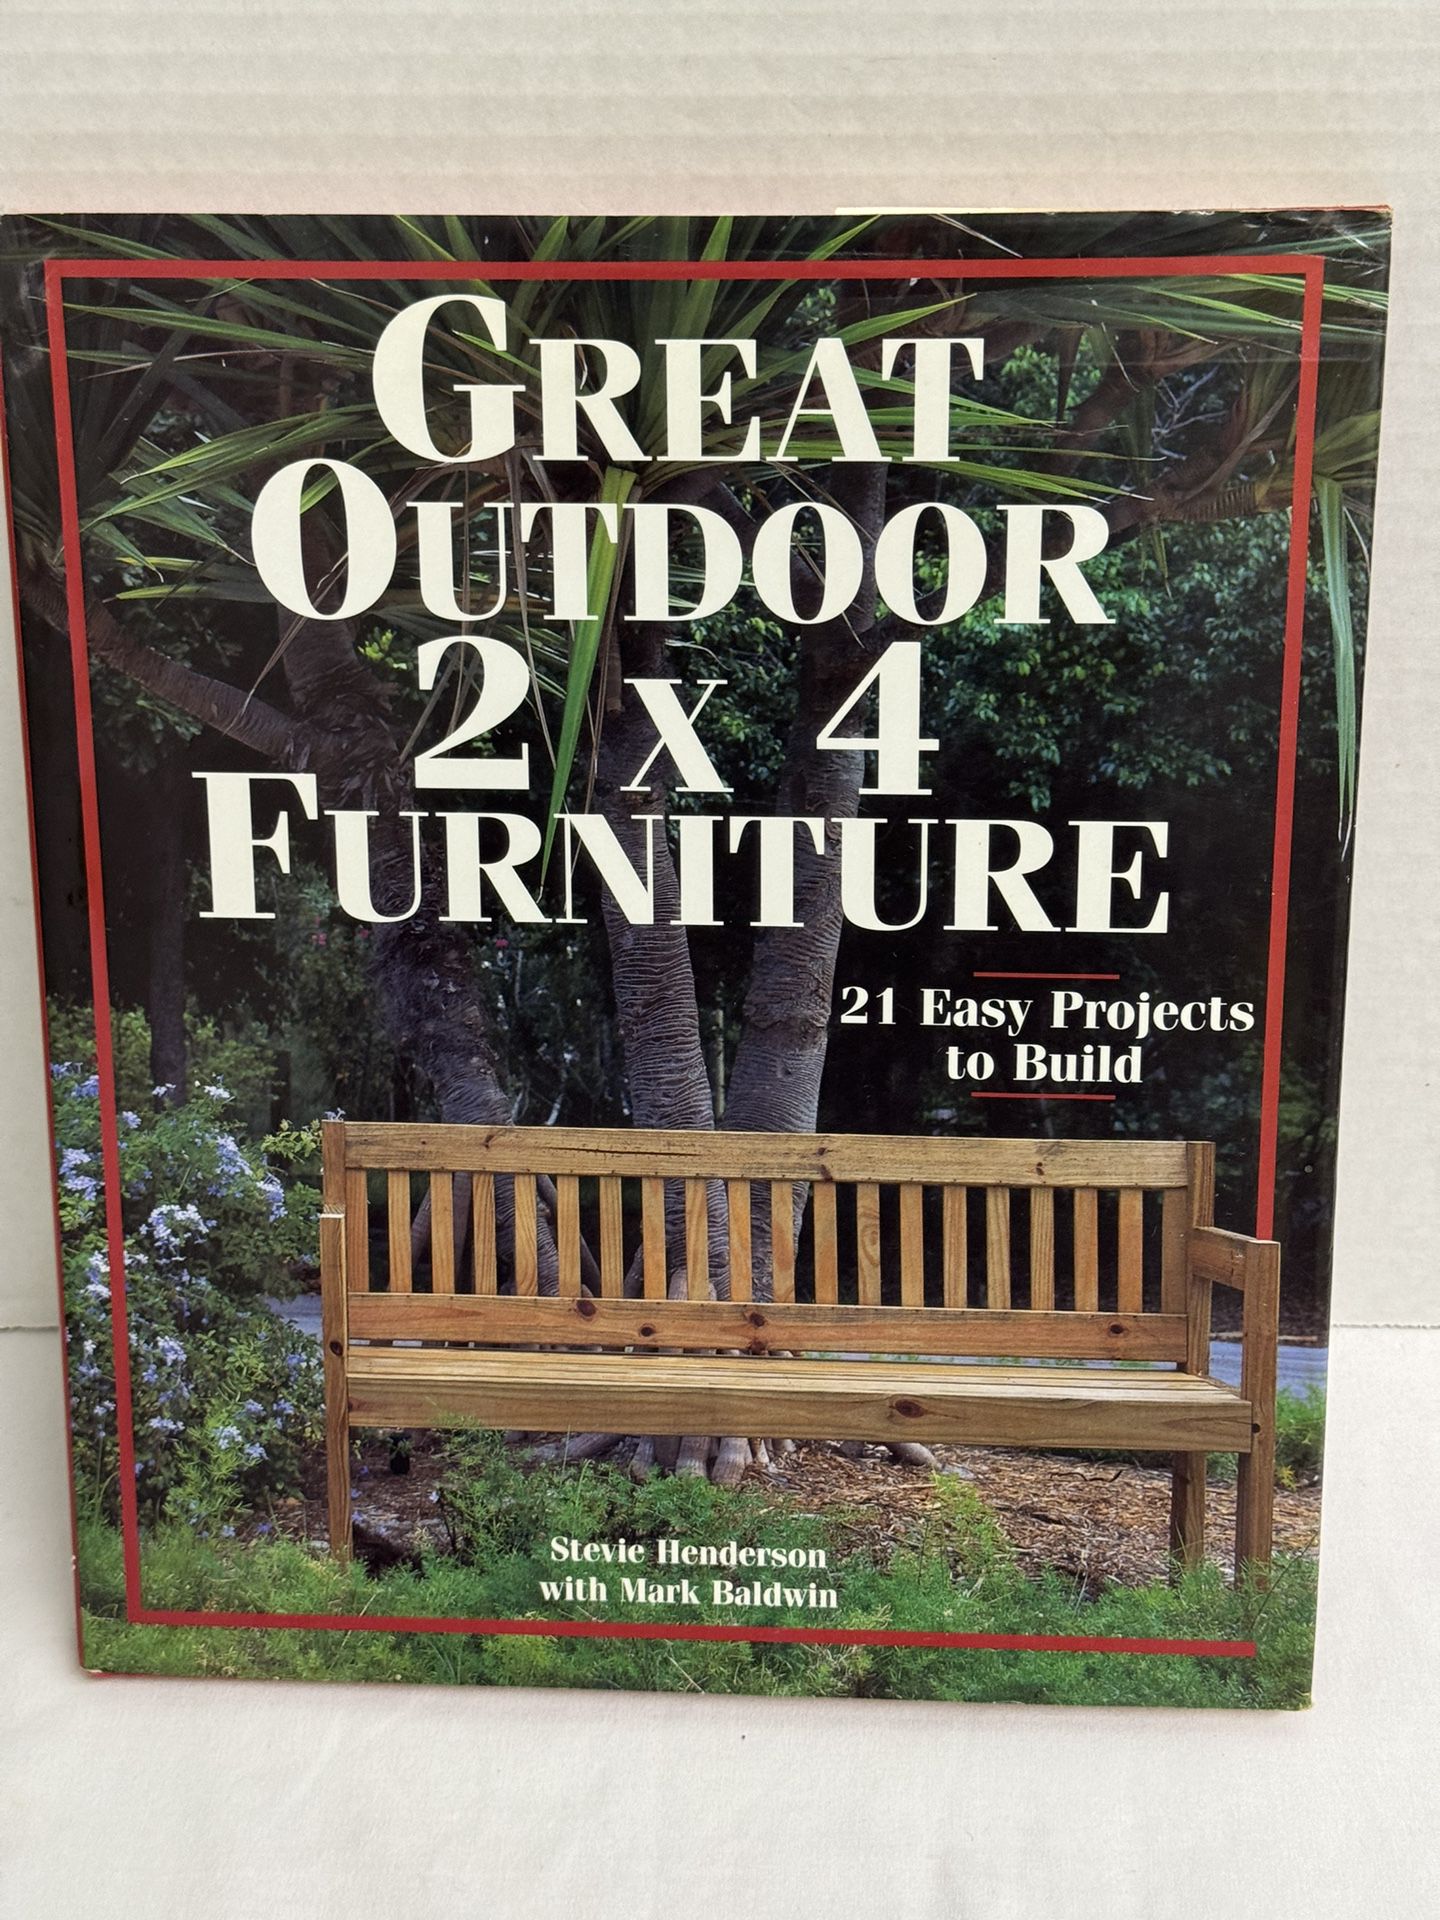 Book Great Outdoor 2X4 Furniture. 21 Easy Projects to Build. Book has dust jacket.